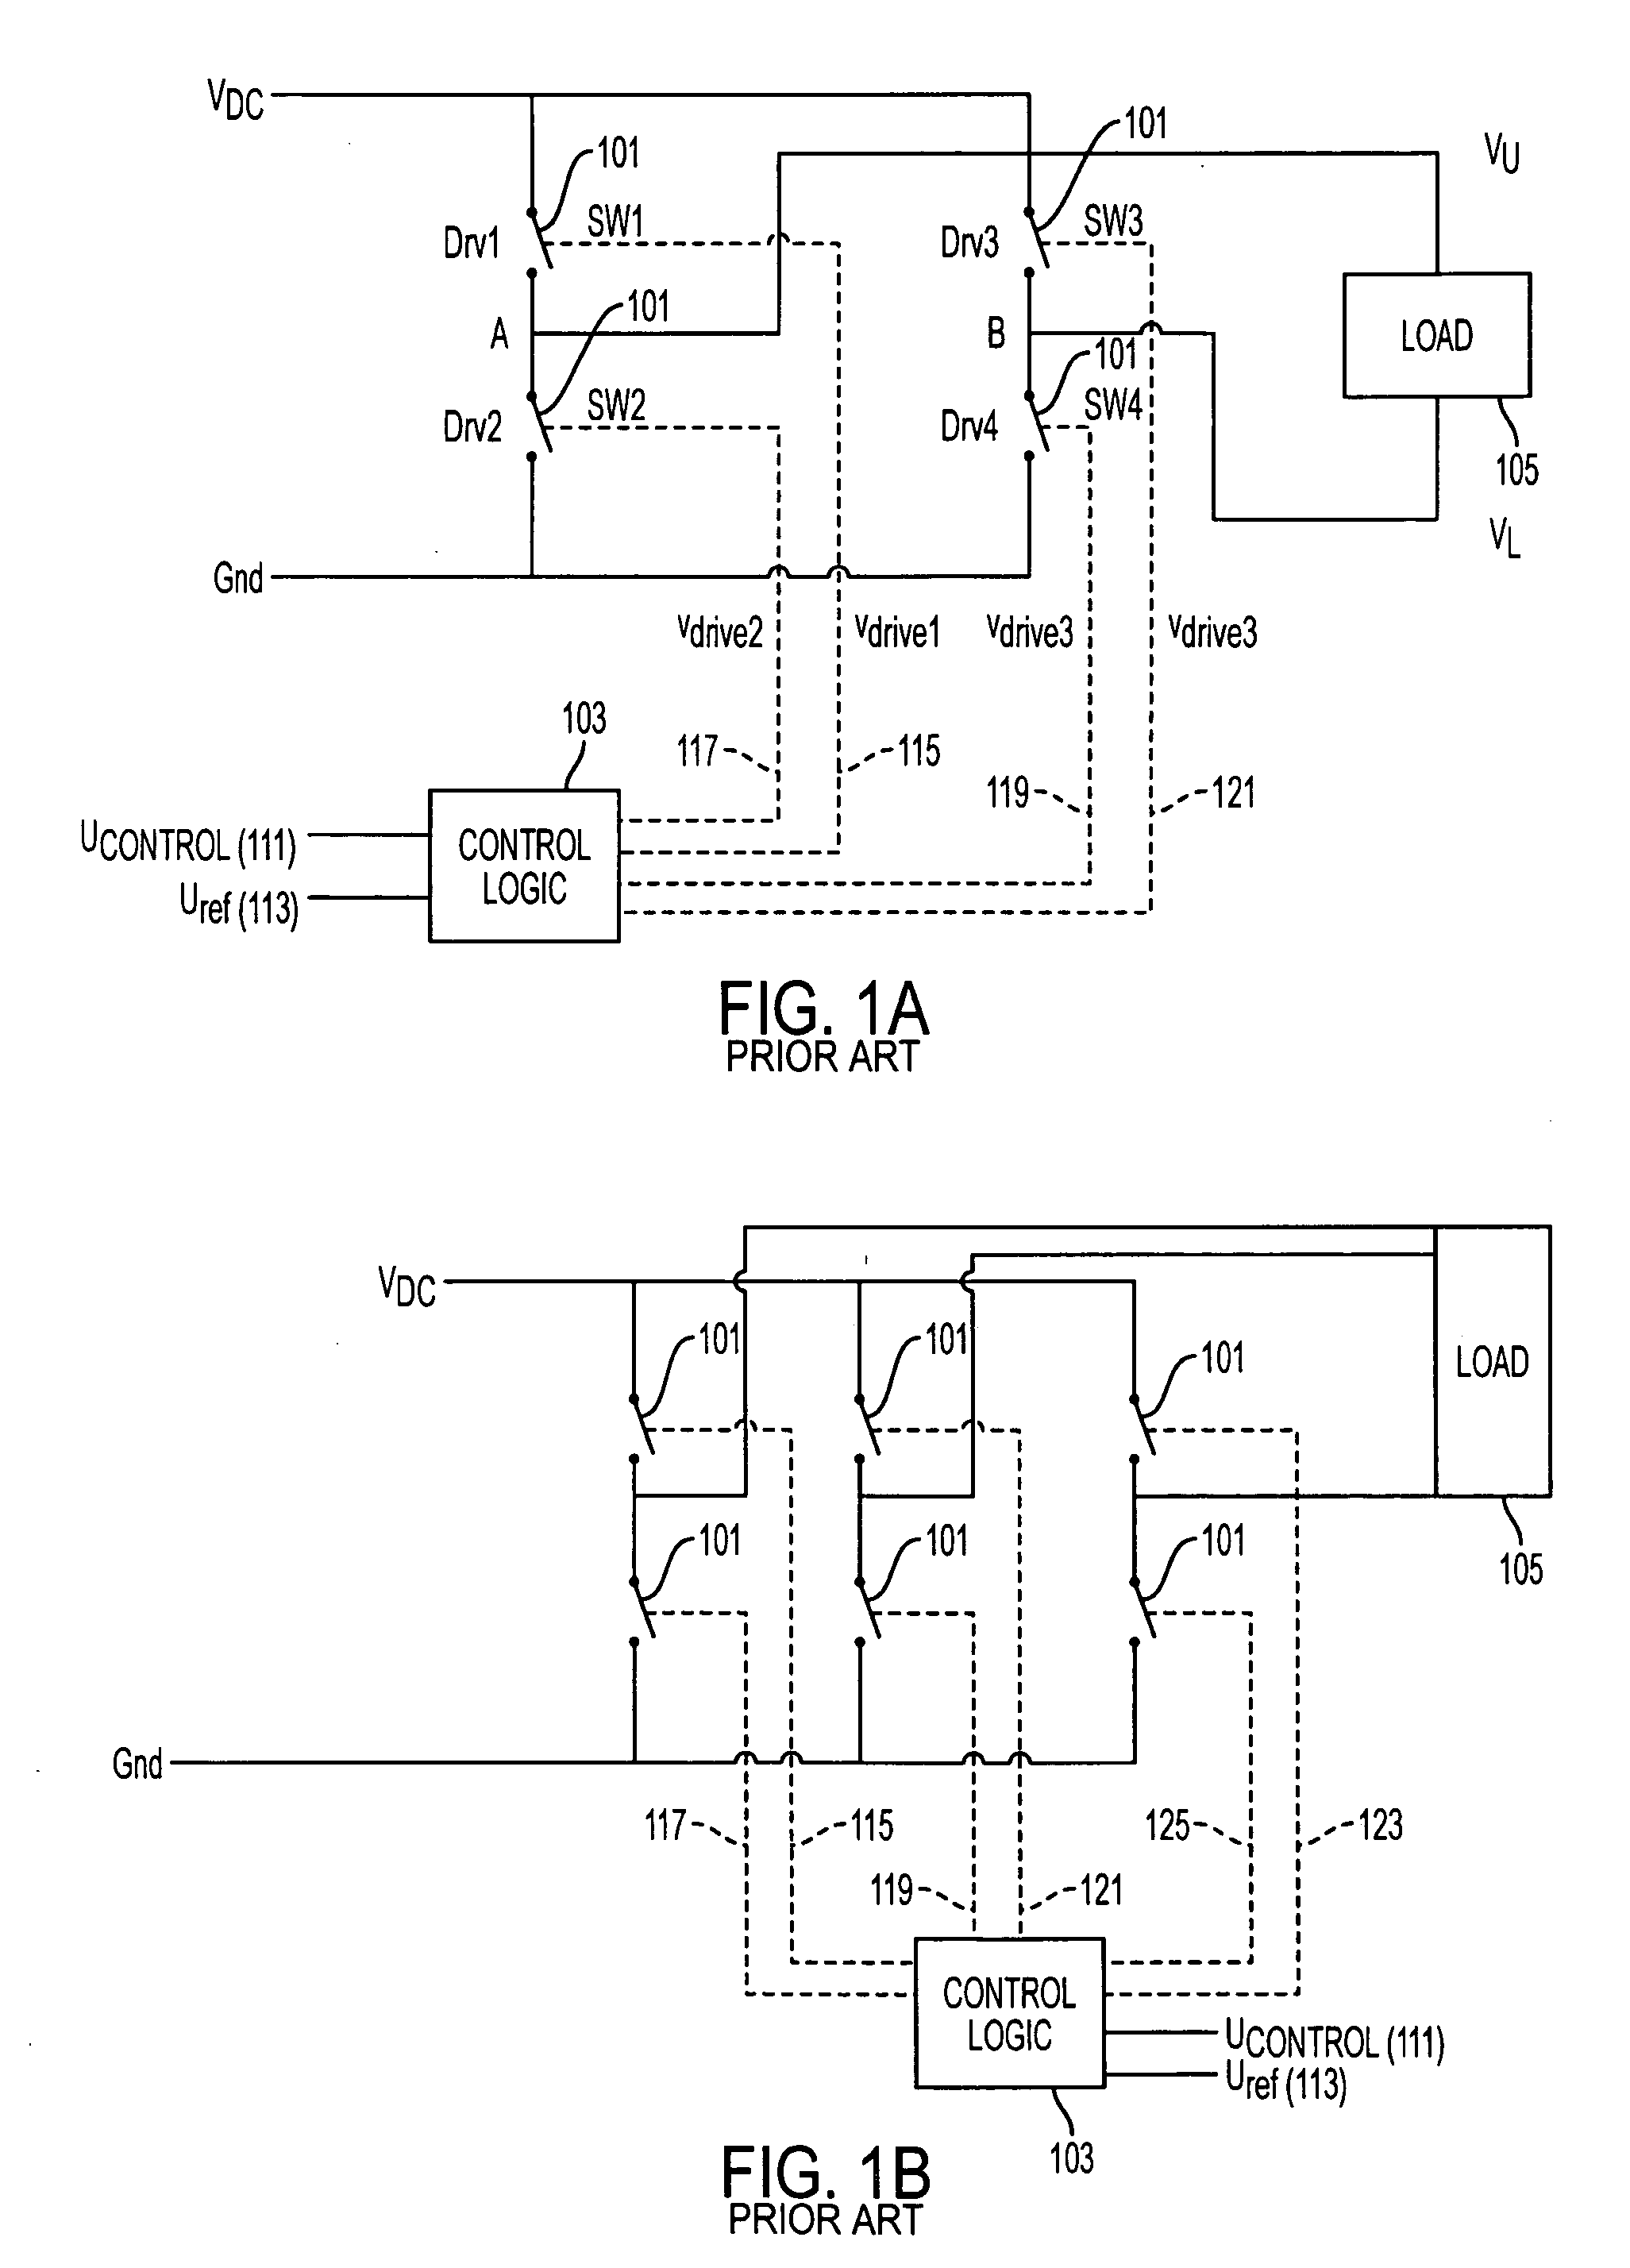 Systems and methods for reducing the magnitude of harmonics produced by a power inverter